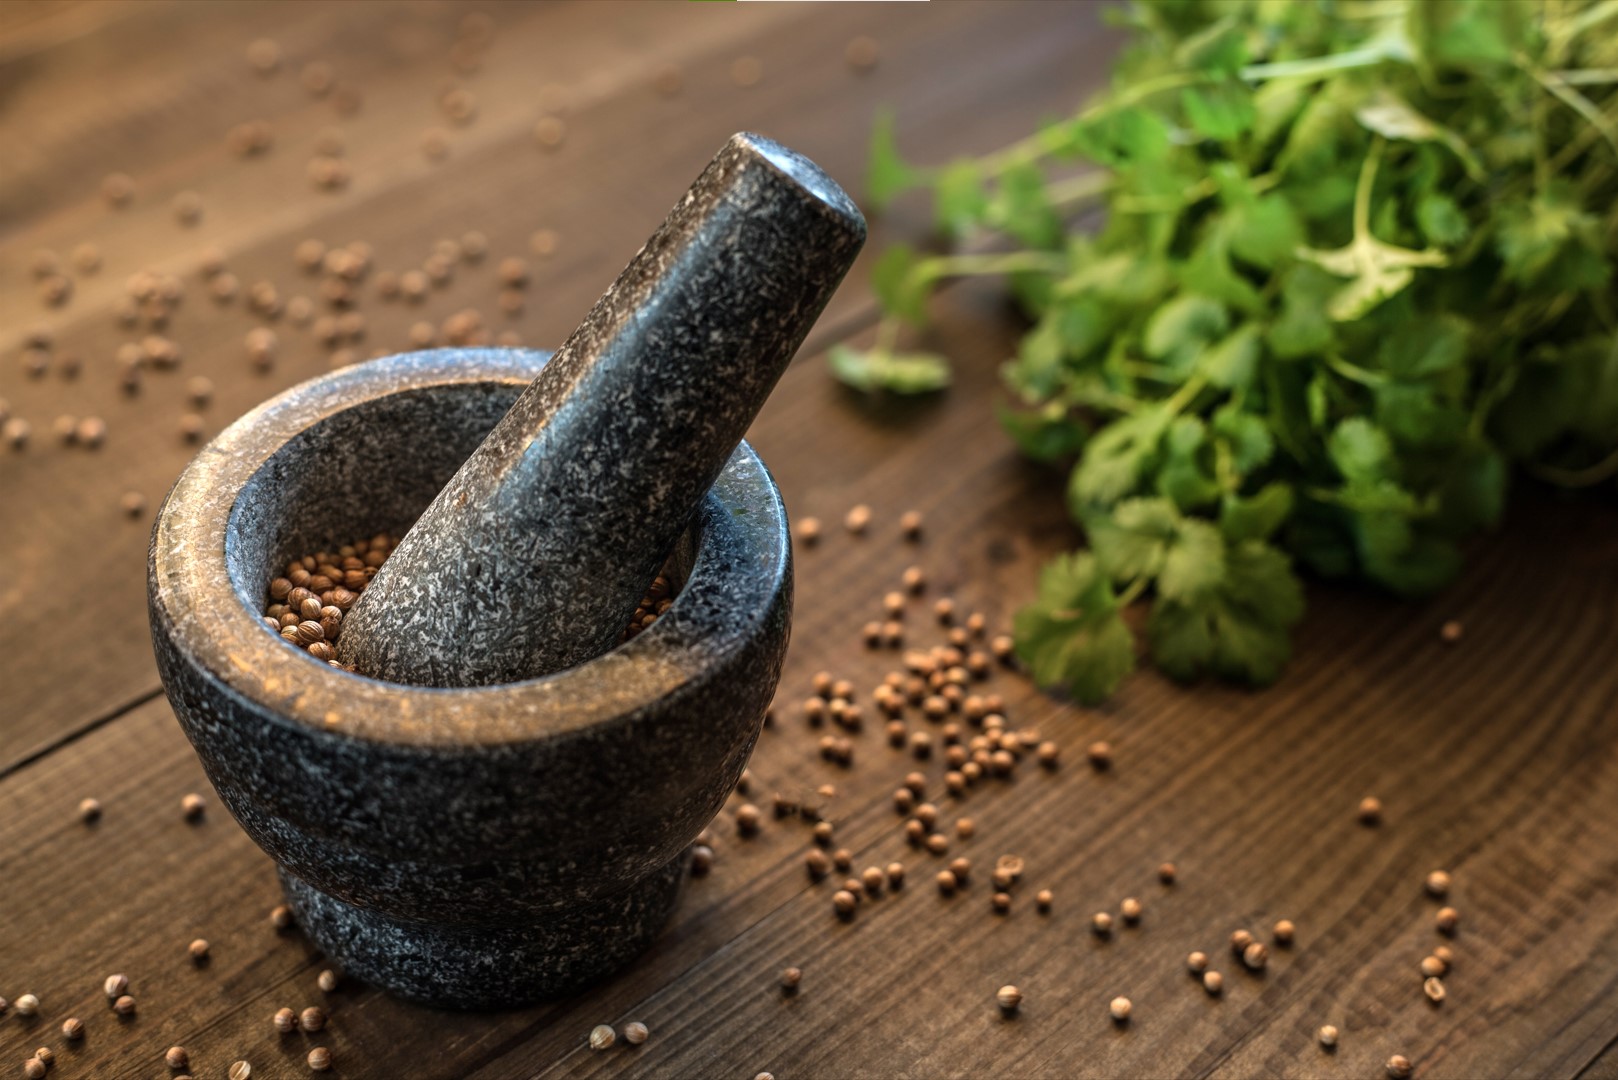 https://recipes.net/wp-content/uploads/2022/10/mortar-and-pestle-recipes-img.jpg